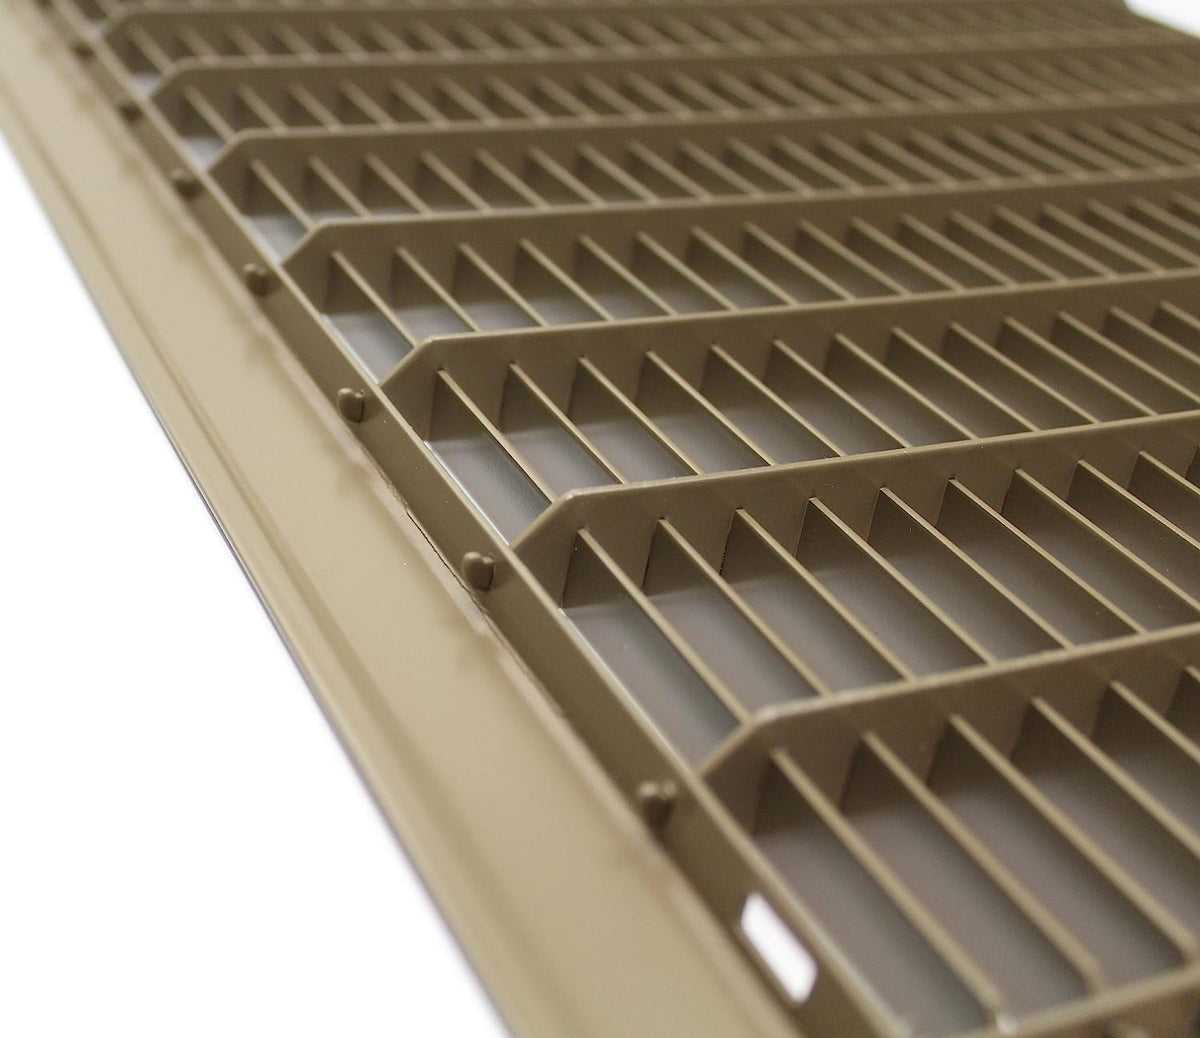 6&quot; X 10&quot; Or 10&quot; X 6&quot; Heavy Duty Floor Grille - Fixed Blades Air Grille - Brown [Outer Dimensions: 7.75 X 11.75]